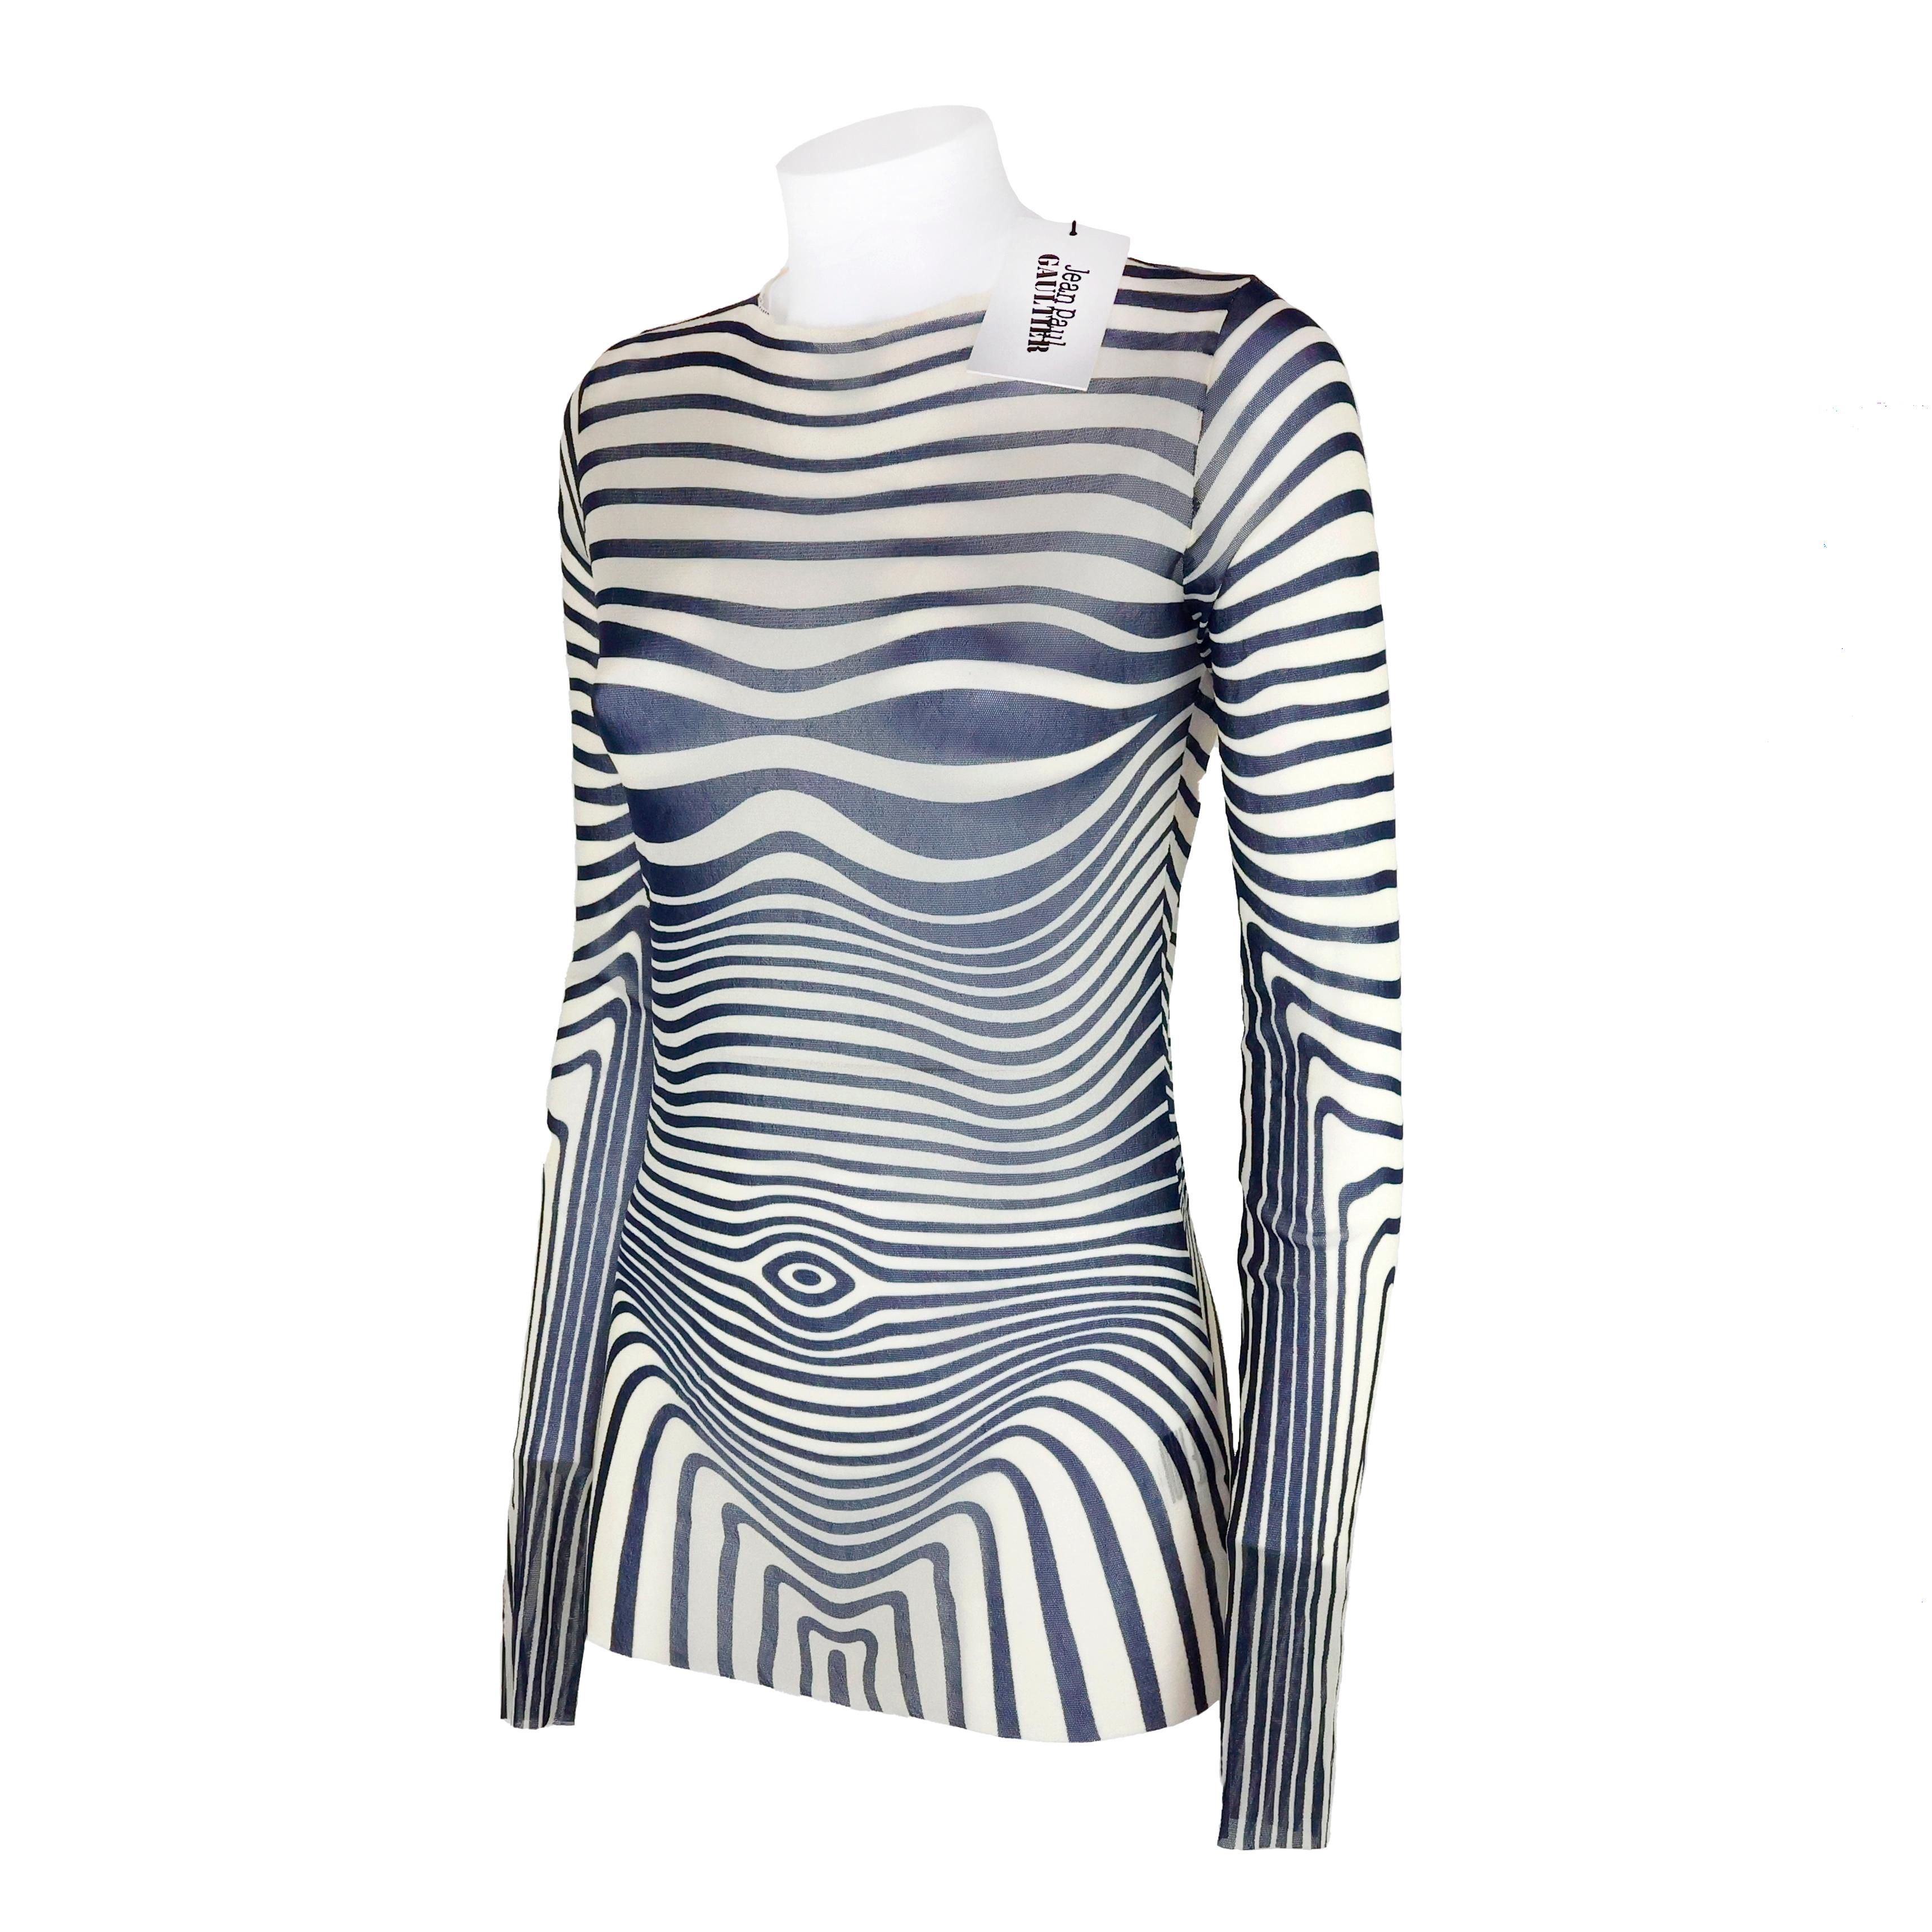 Jean Paul Gaultier Cyberbaba Top In New Condition For Sale In Bressanone, IT